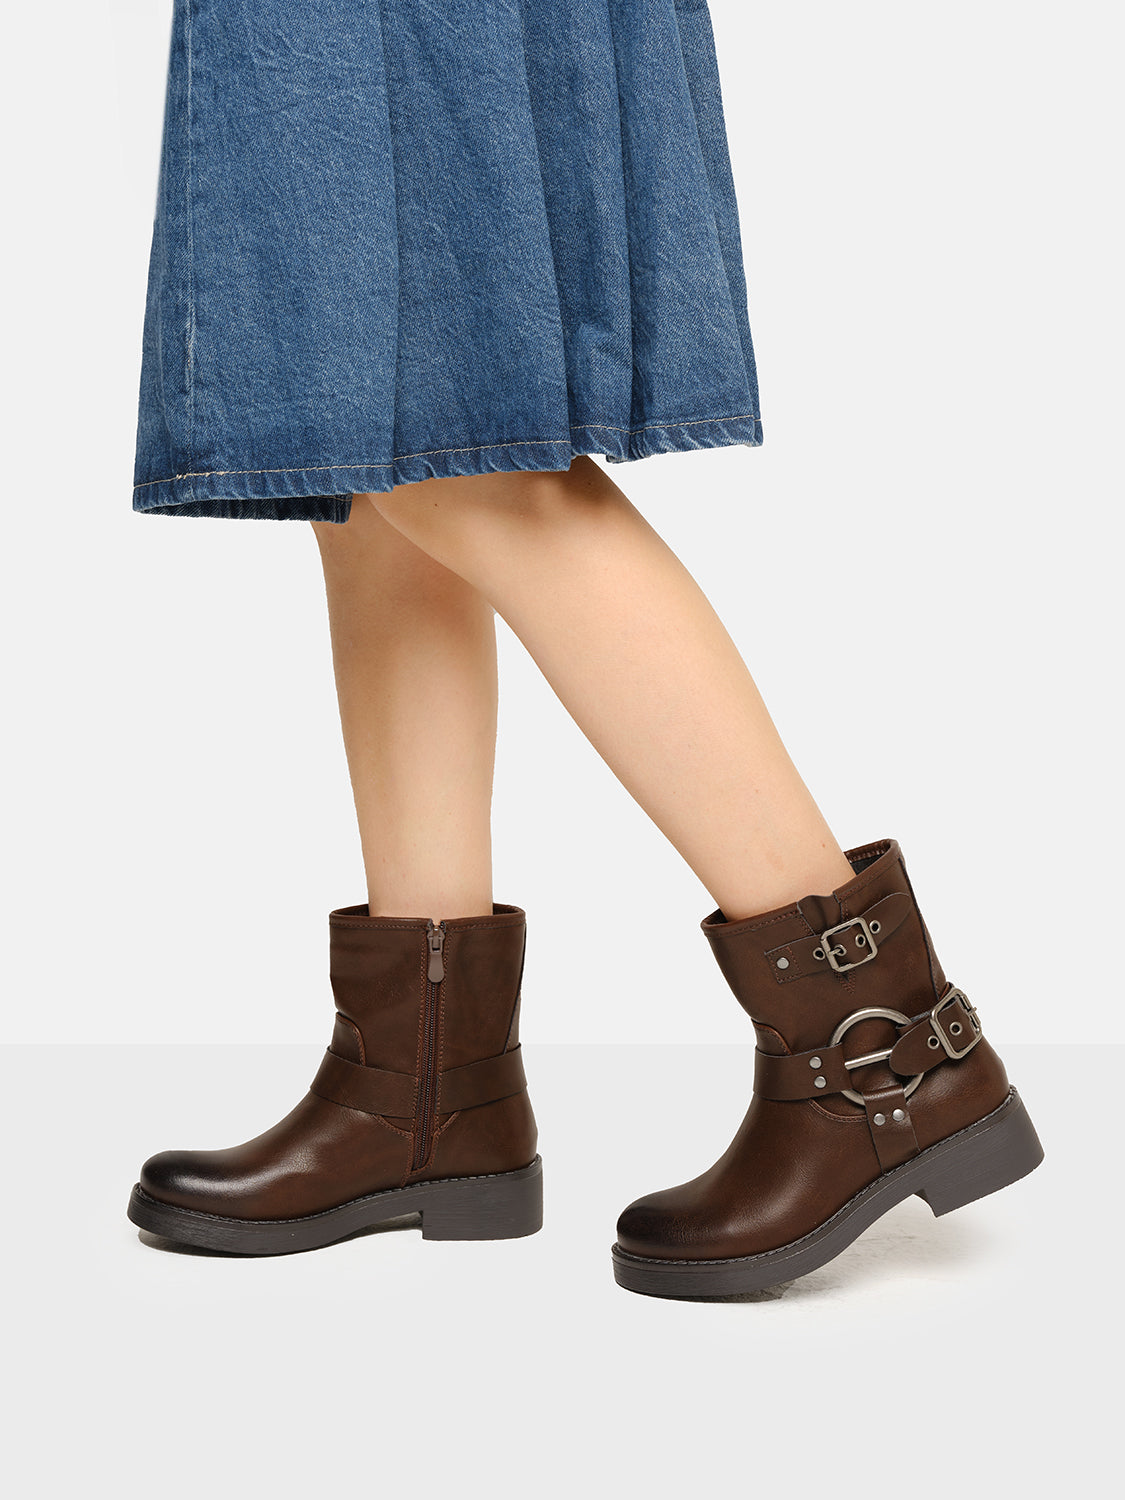 Track ankle boot with buckles - BROWN